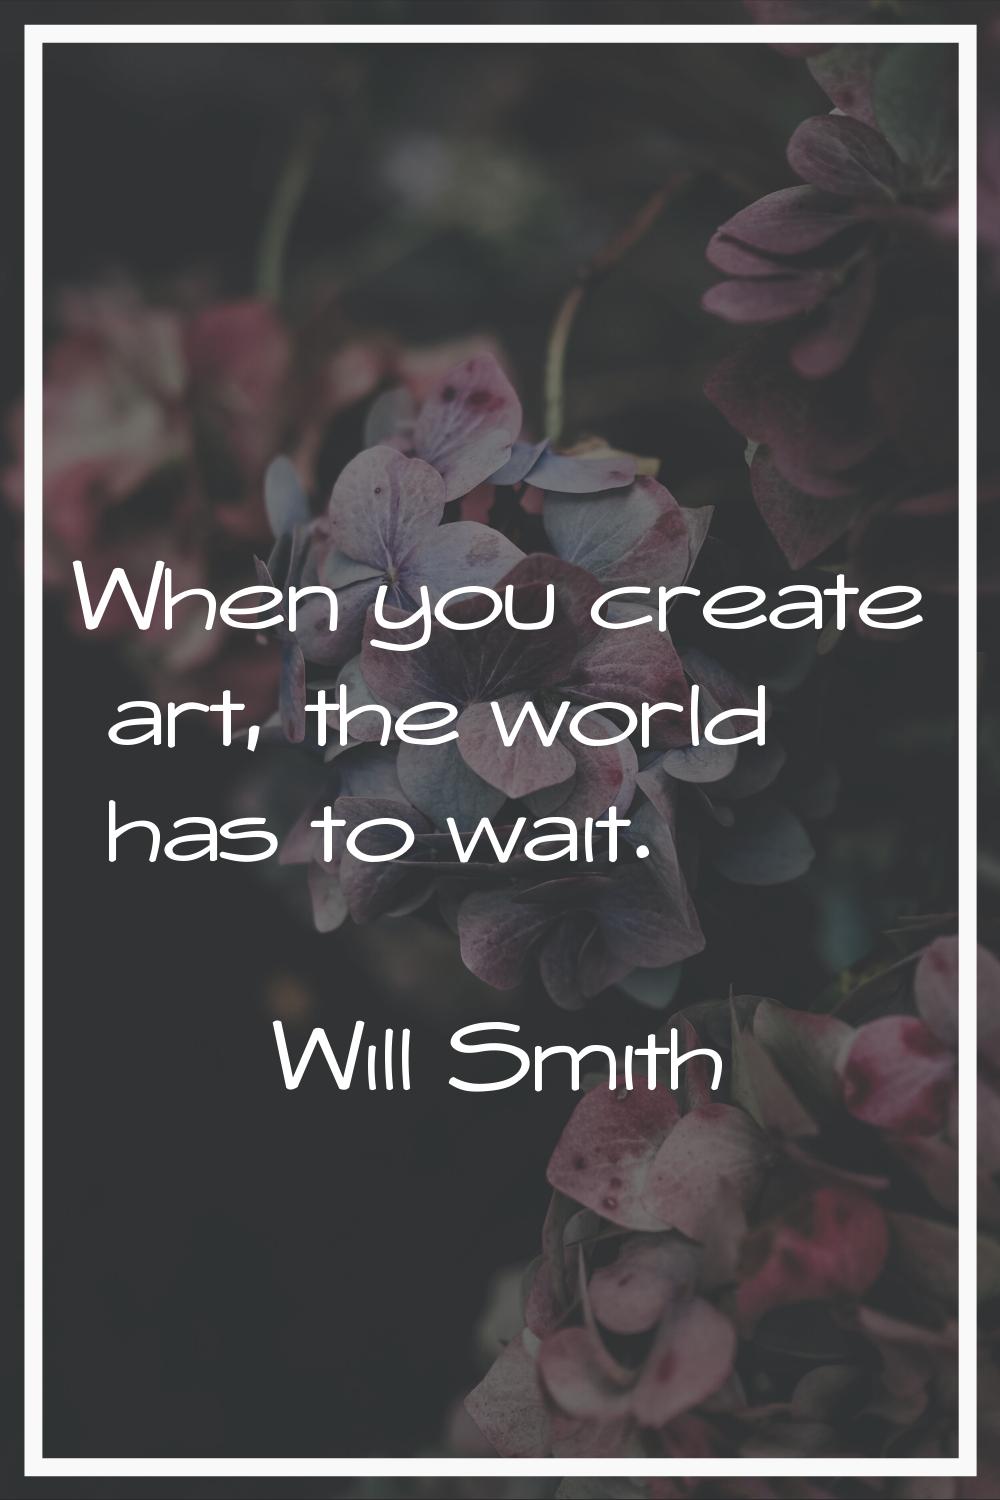 When you create art, the world has to wait.